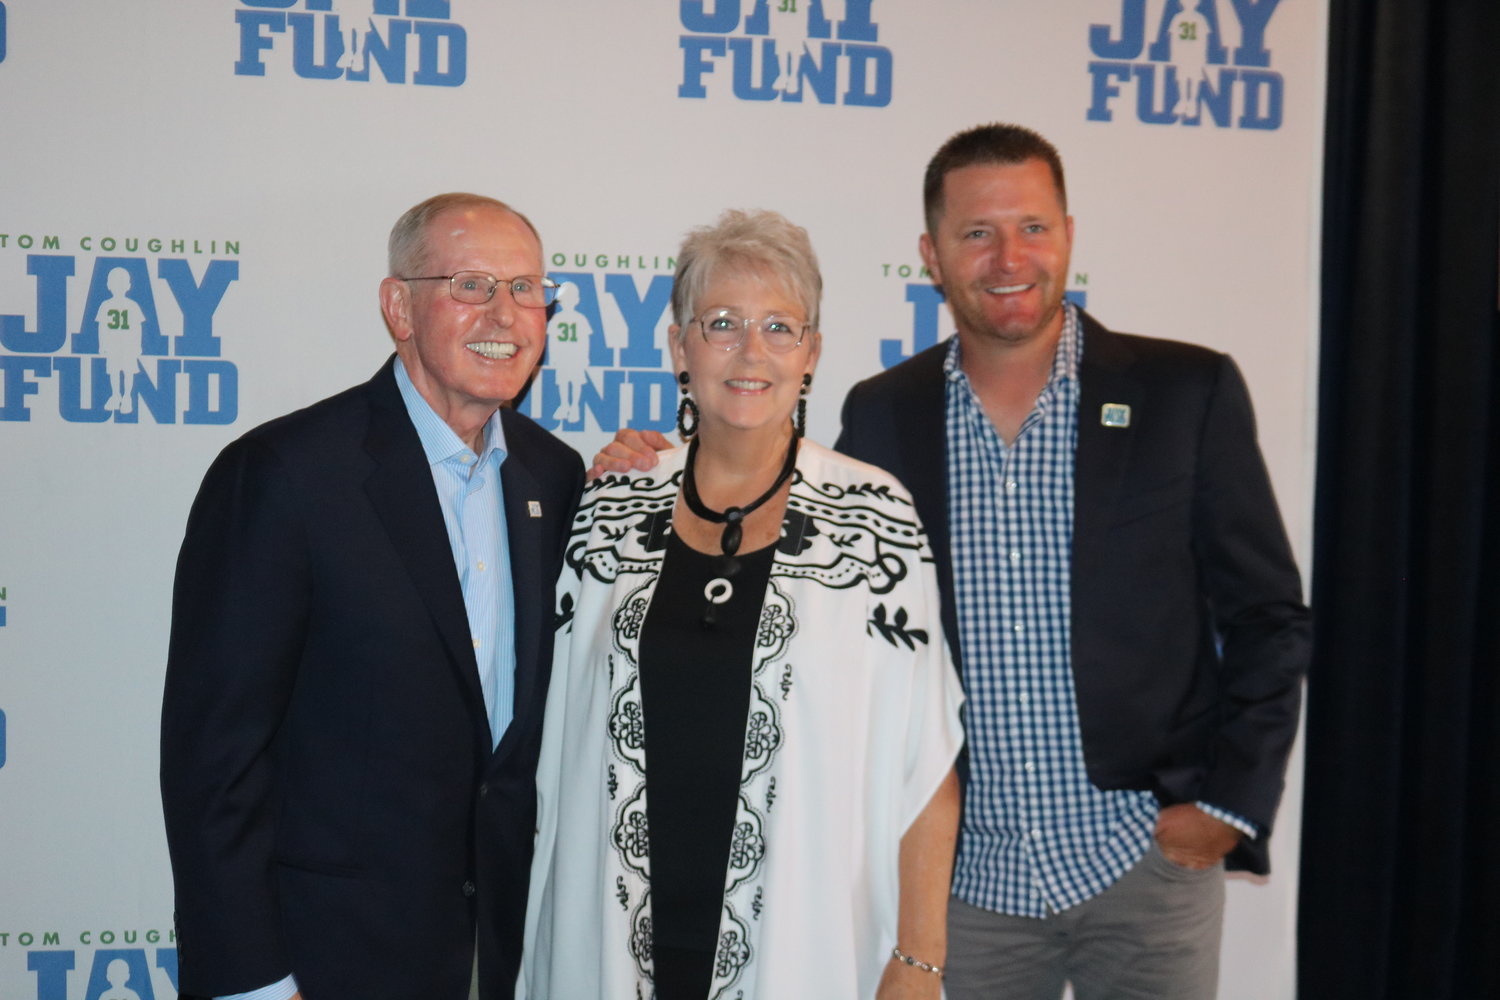 Tom Coughlin with former Jacksonville Jaguars kicker Josh Scobee and his mother.